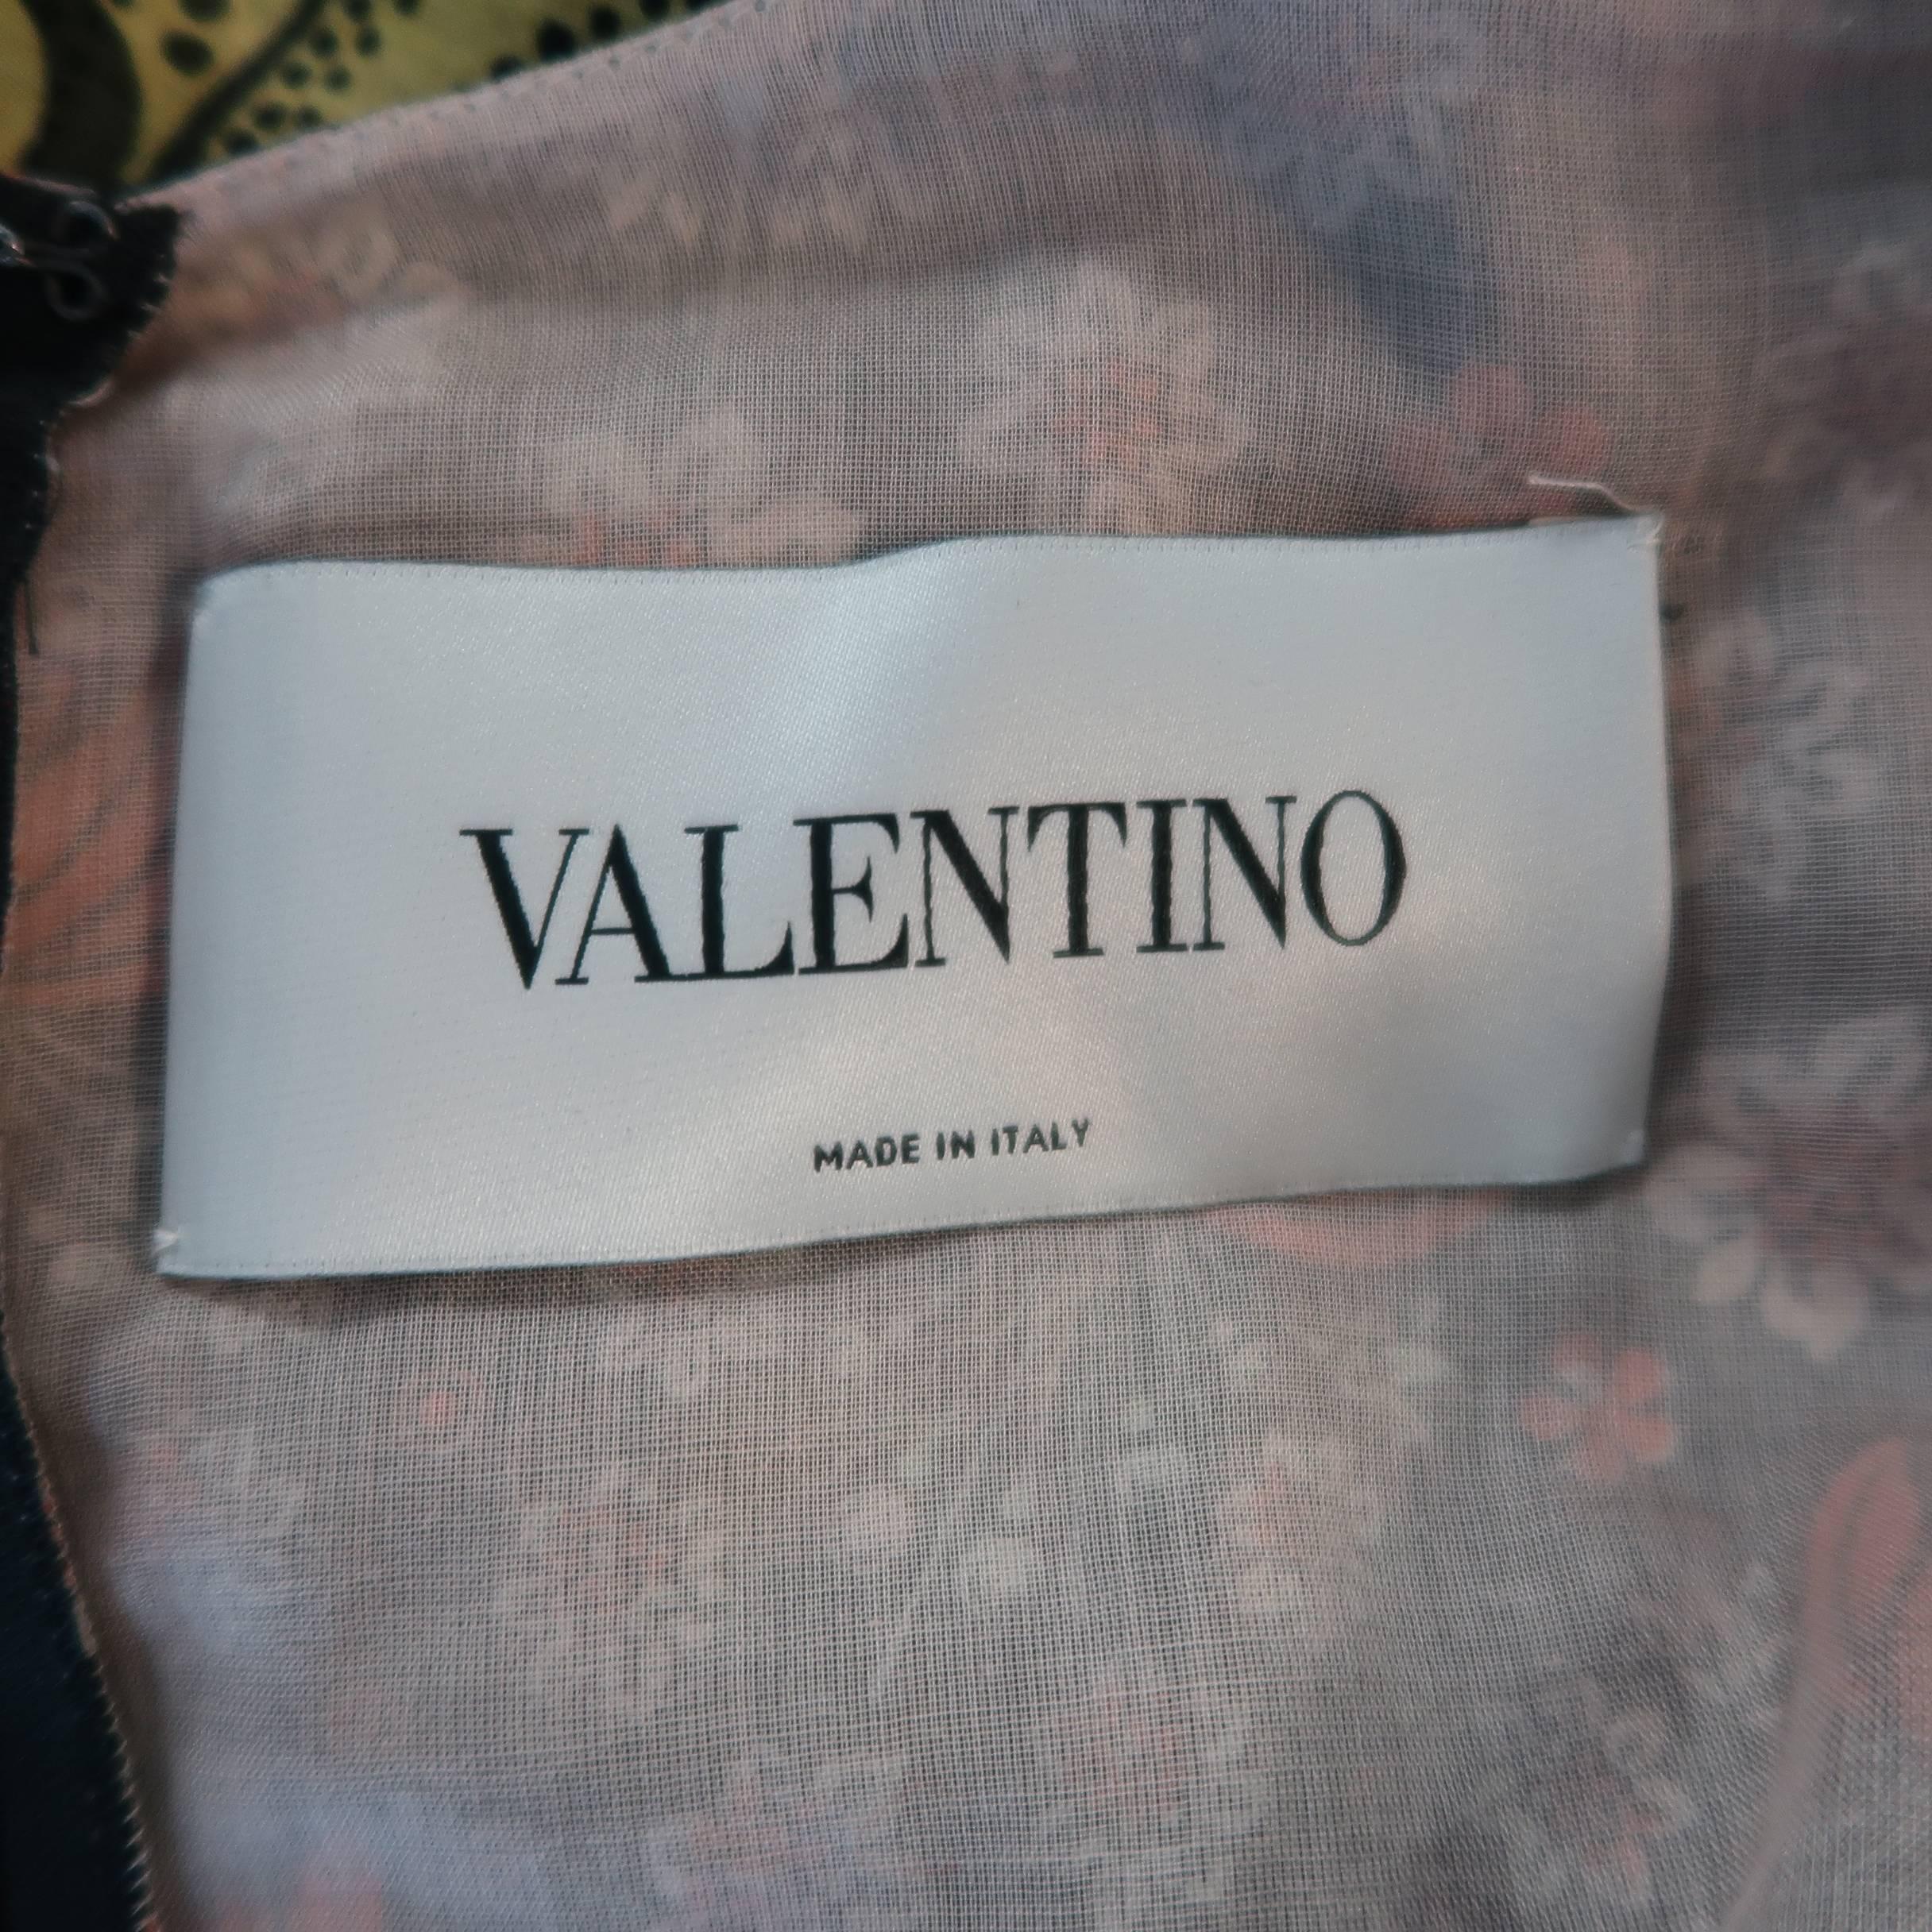 Valentino Patchwork Floral Cotton Muslin Ruffle Gown 8